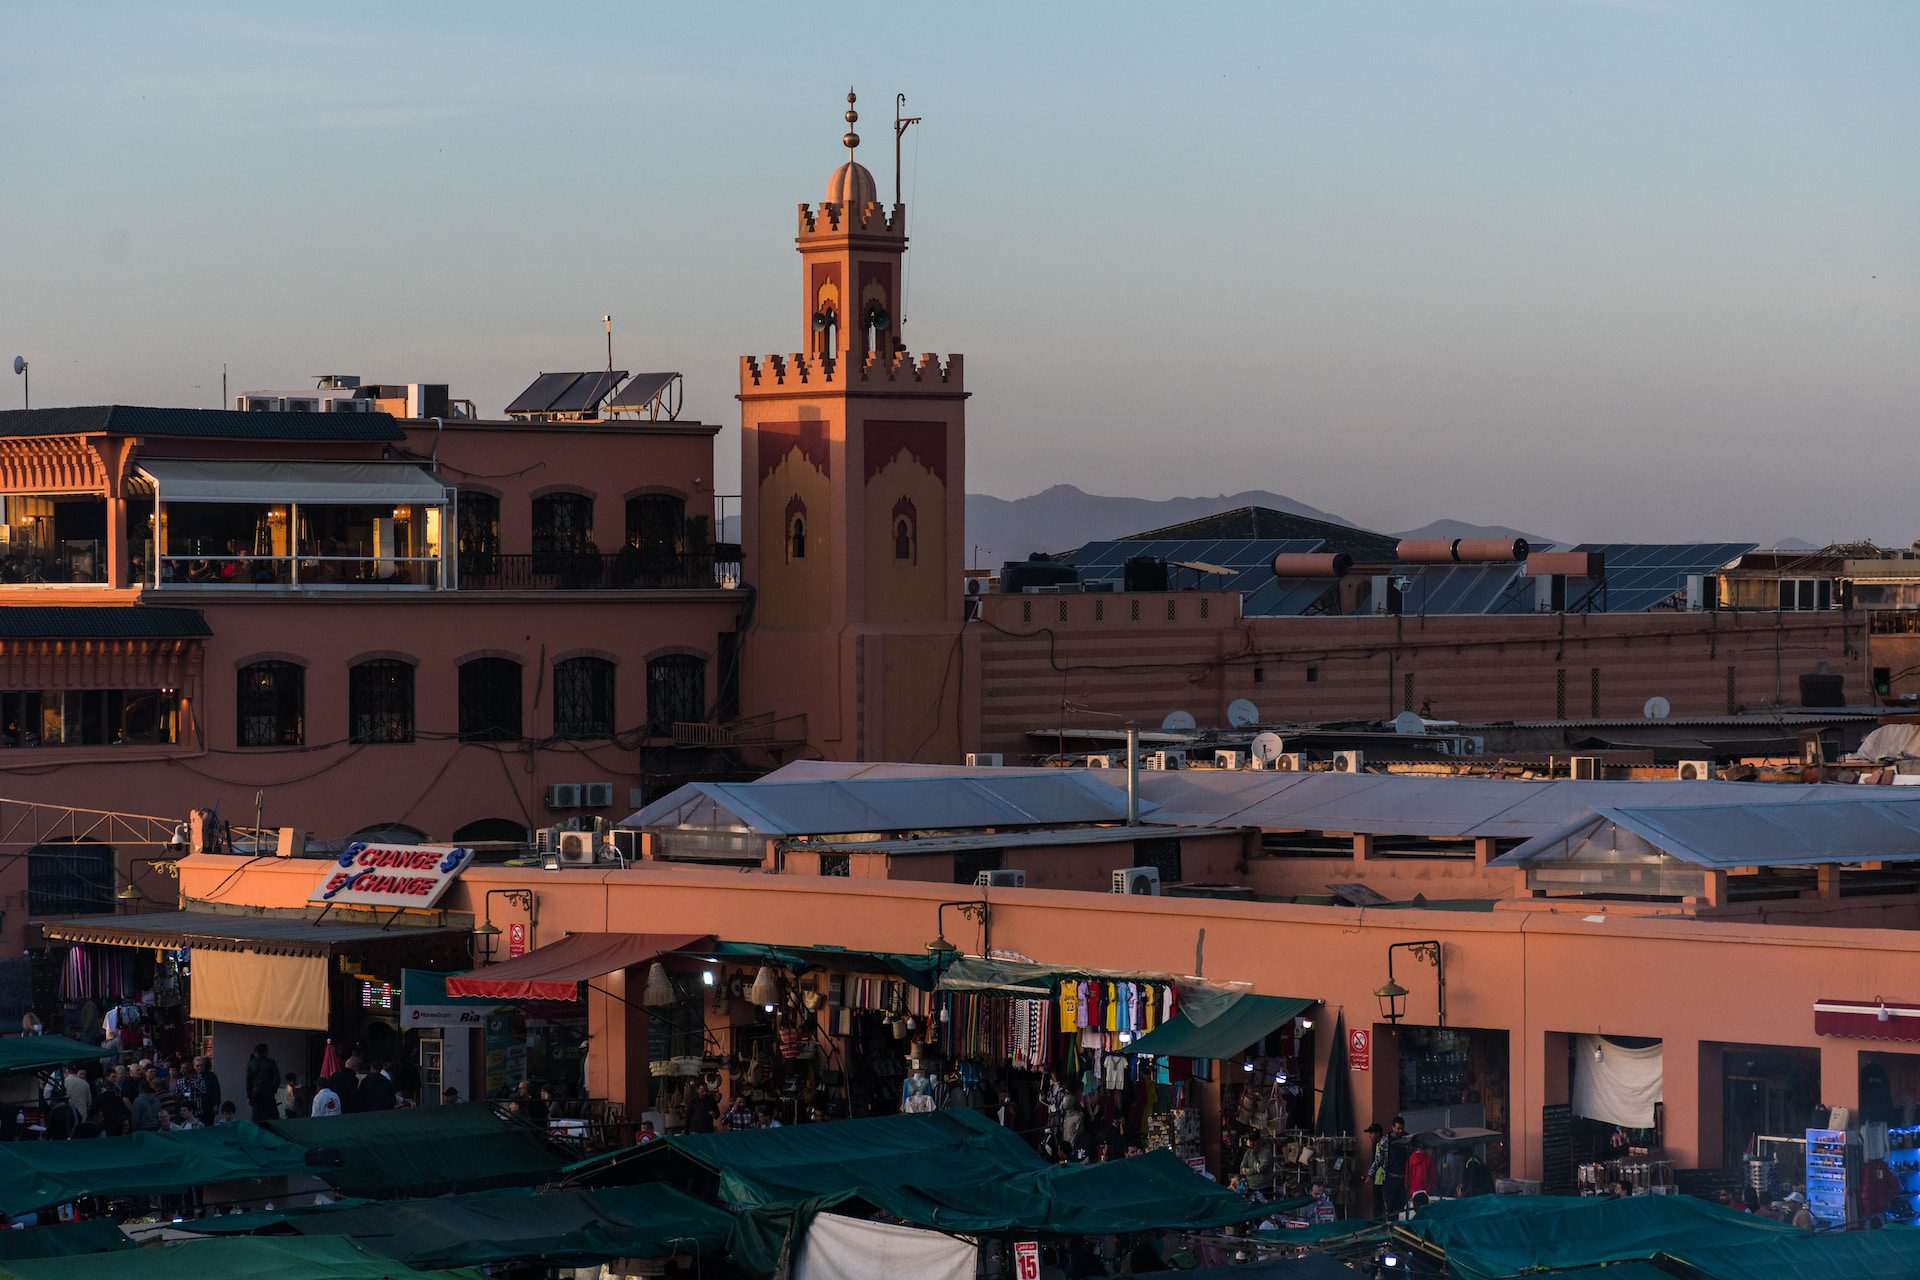 Jemaa El Fna square in the Medina district of Marrakech.